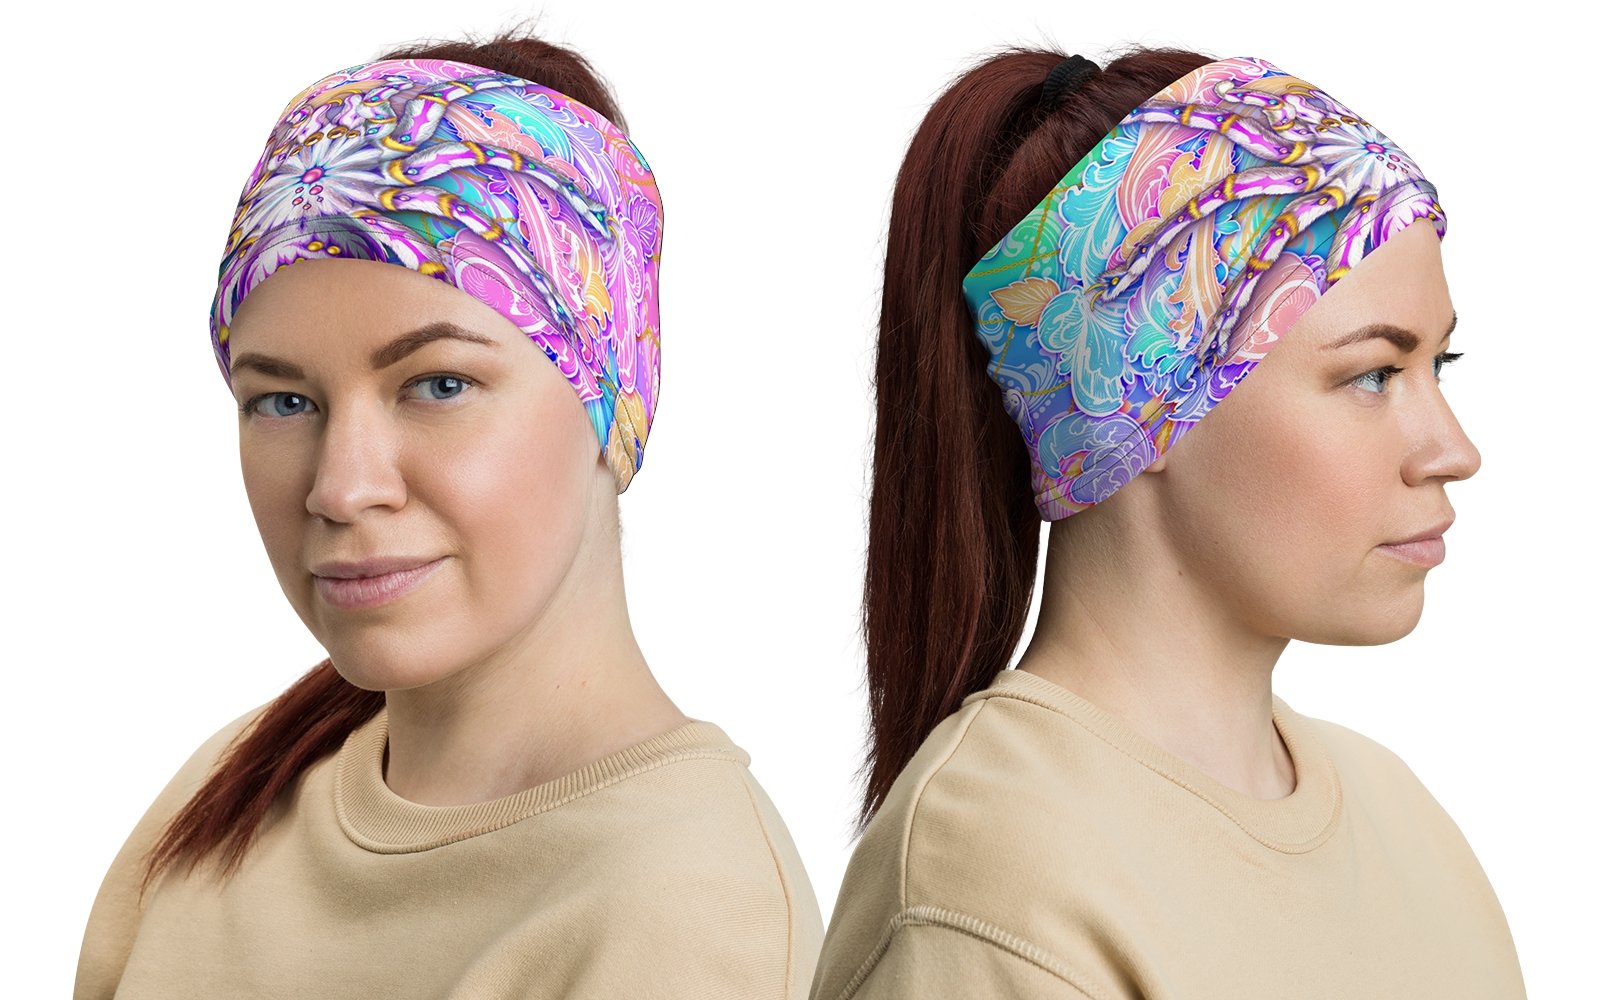 Aesthetic Neck Gaiter, Face Mask, Head Covering, Holographic Pastel, Psychedelic Rave Festival Outfit, Tarantula Lover Gift - Spider - Abysm Internal